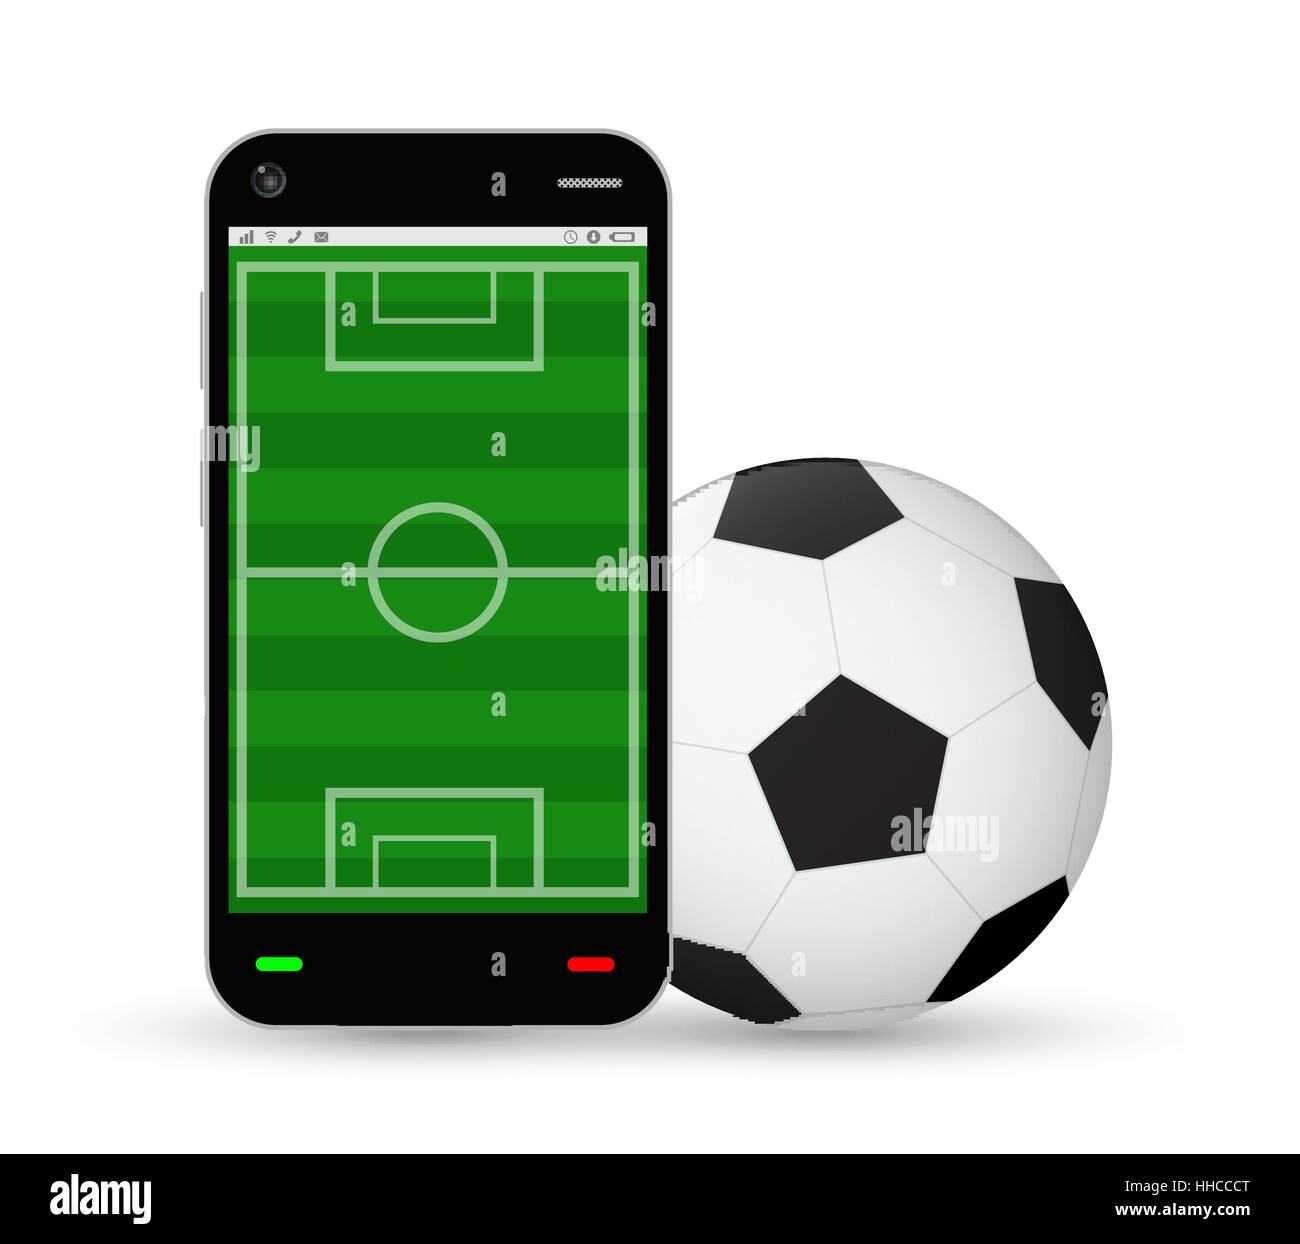 smartphone with a football field and soccer football Stock Vector